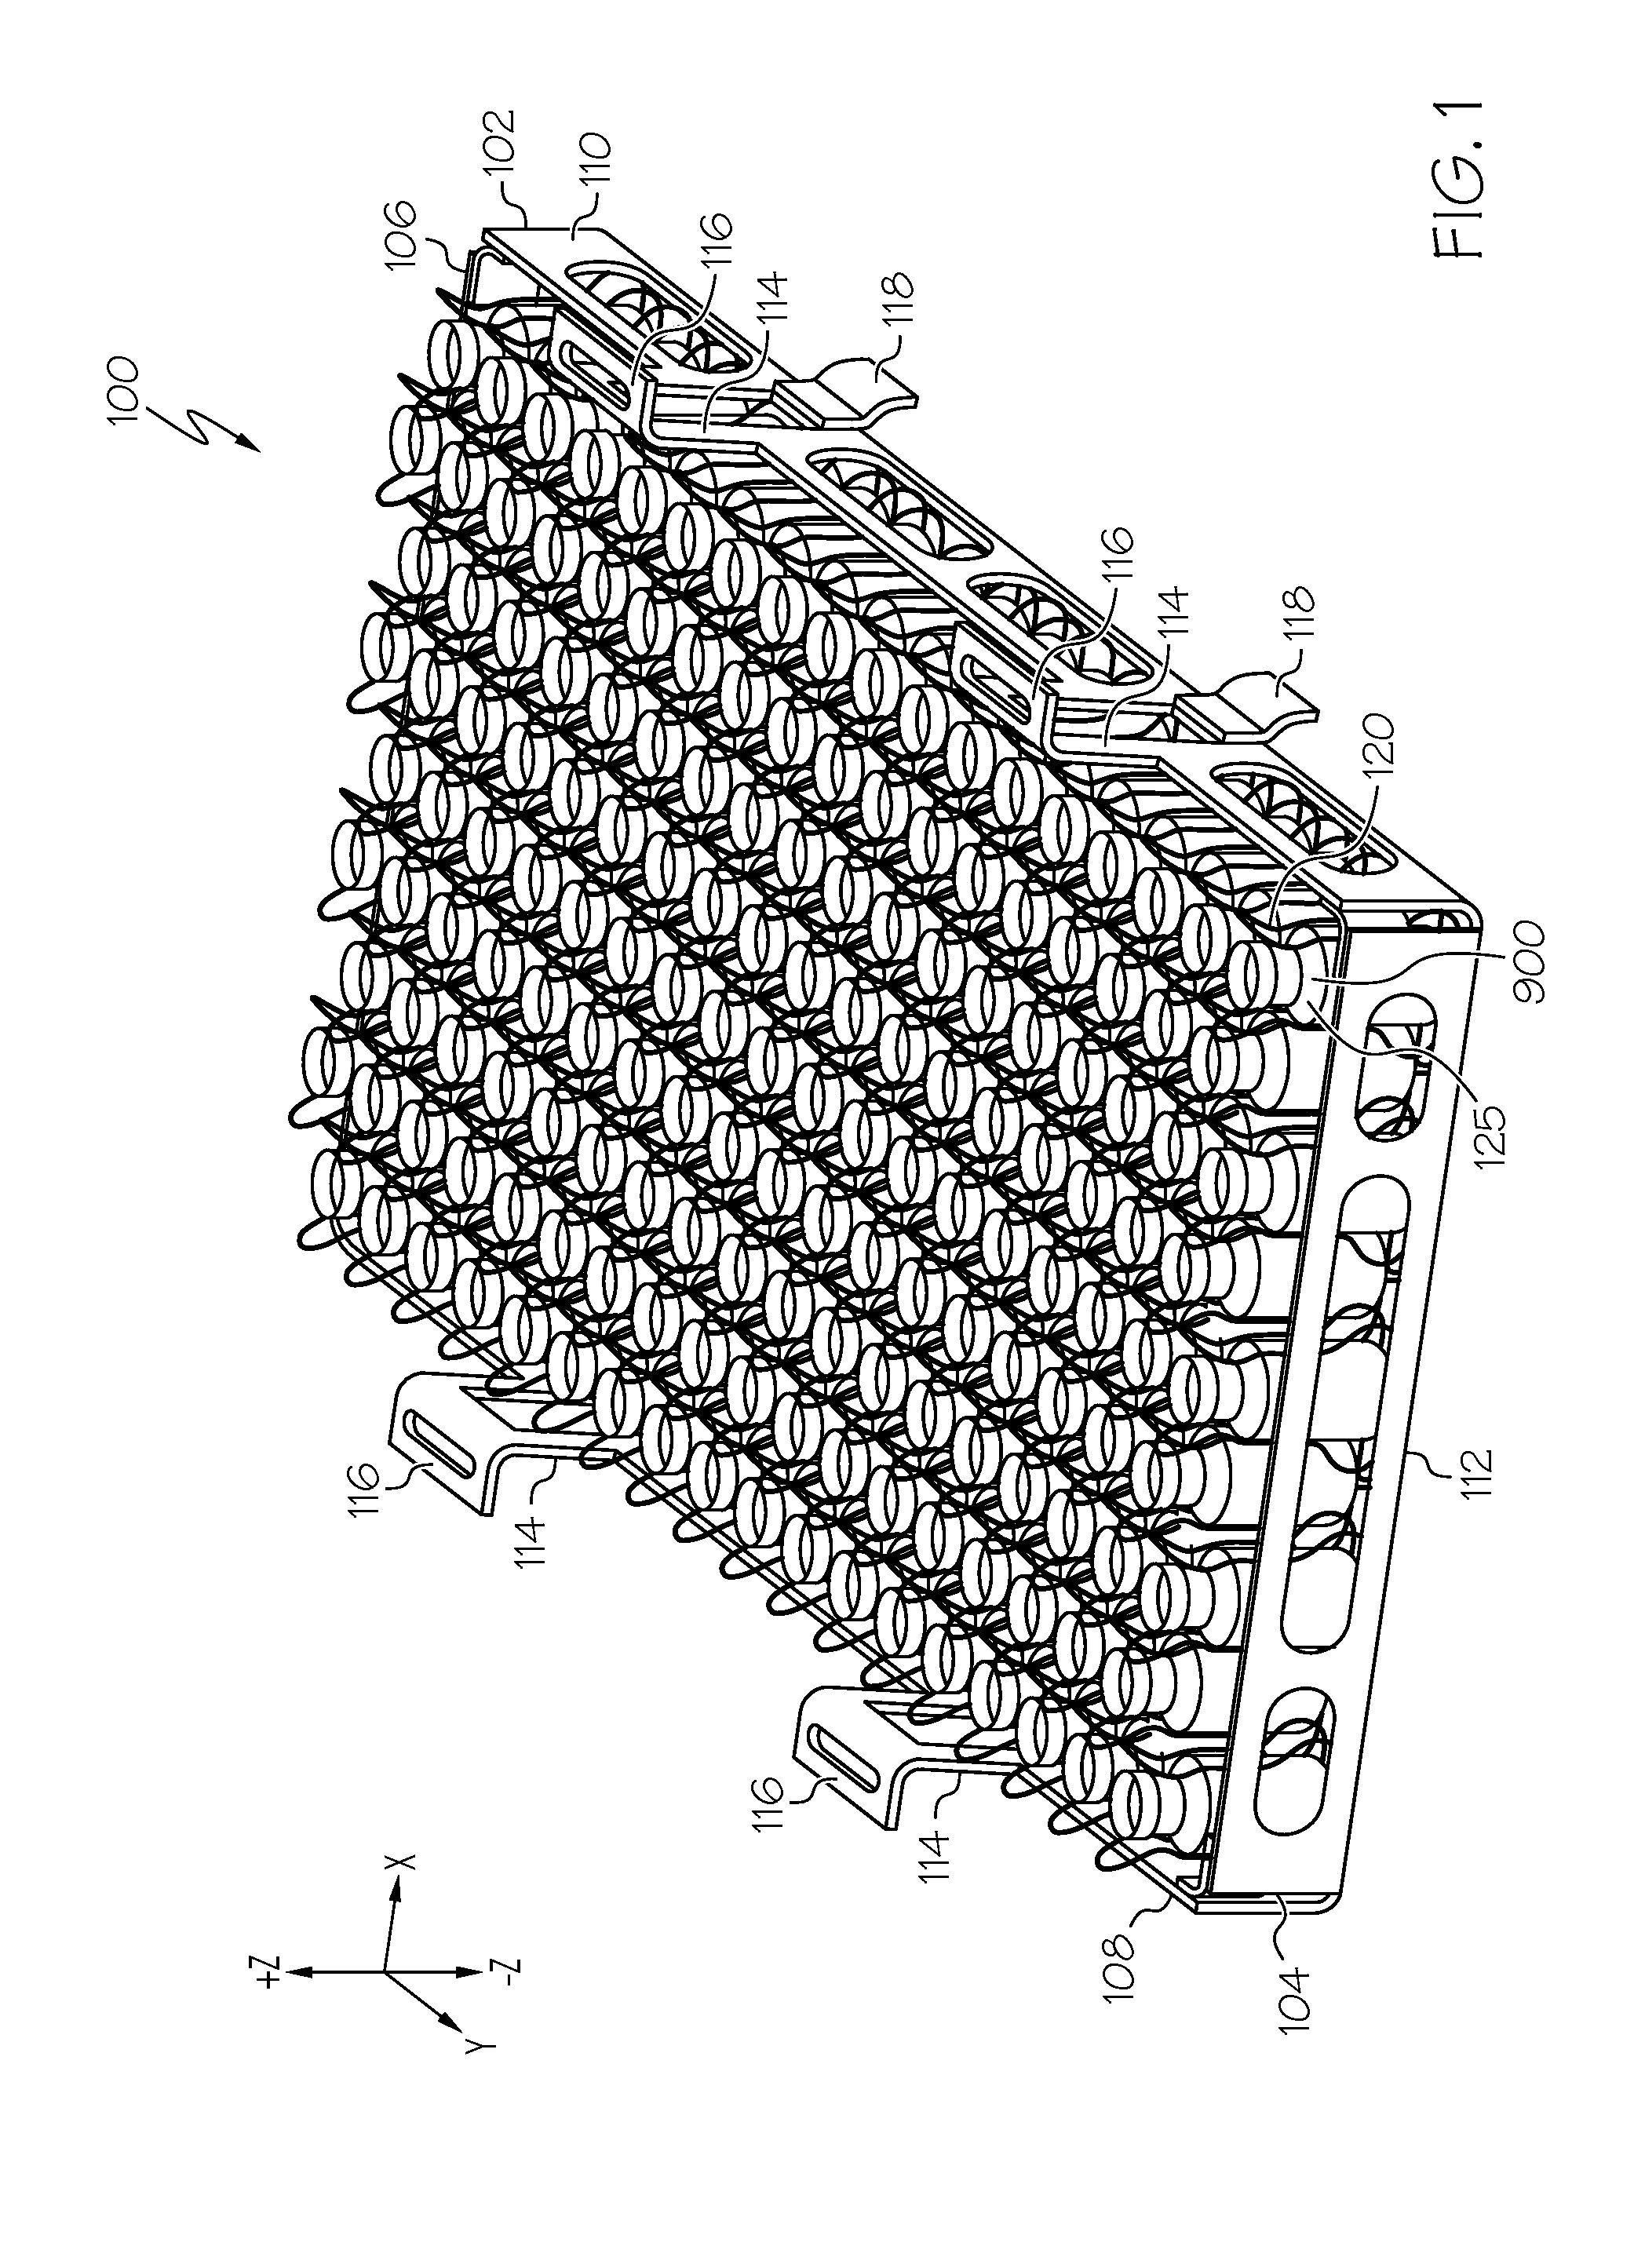 Apparatuses for holding and retaining glass articles